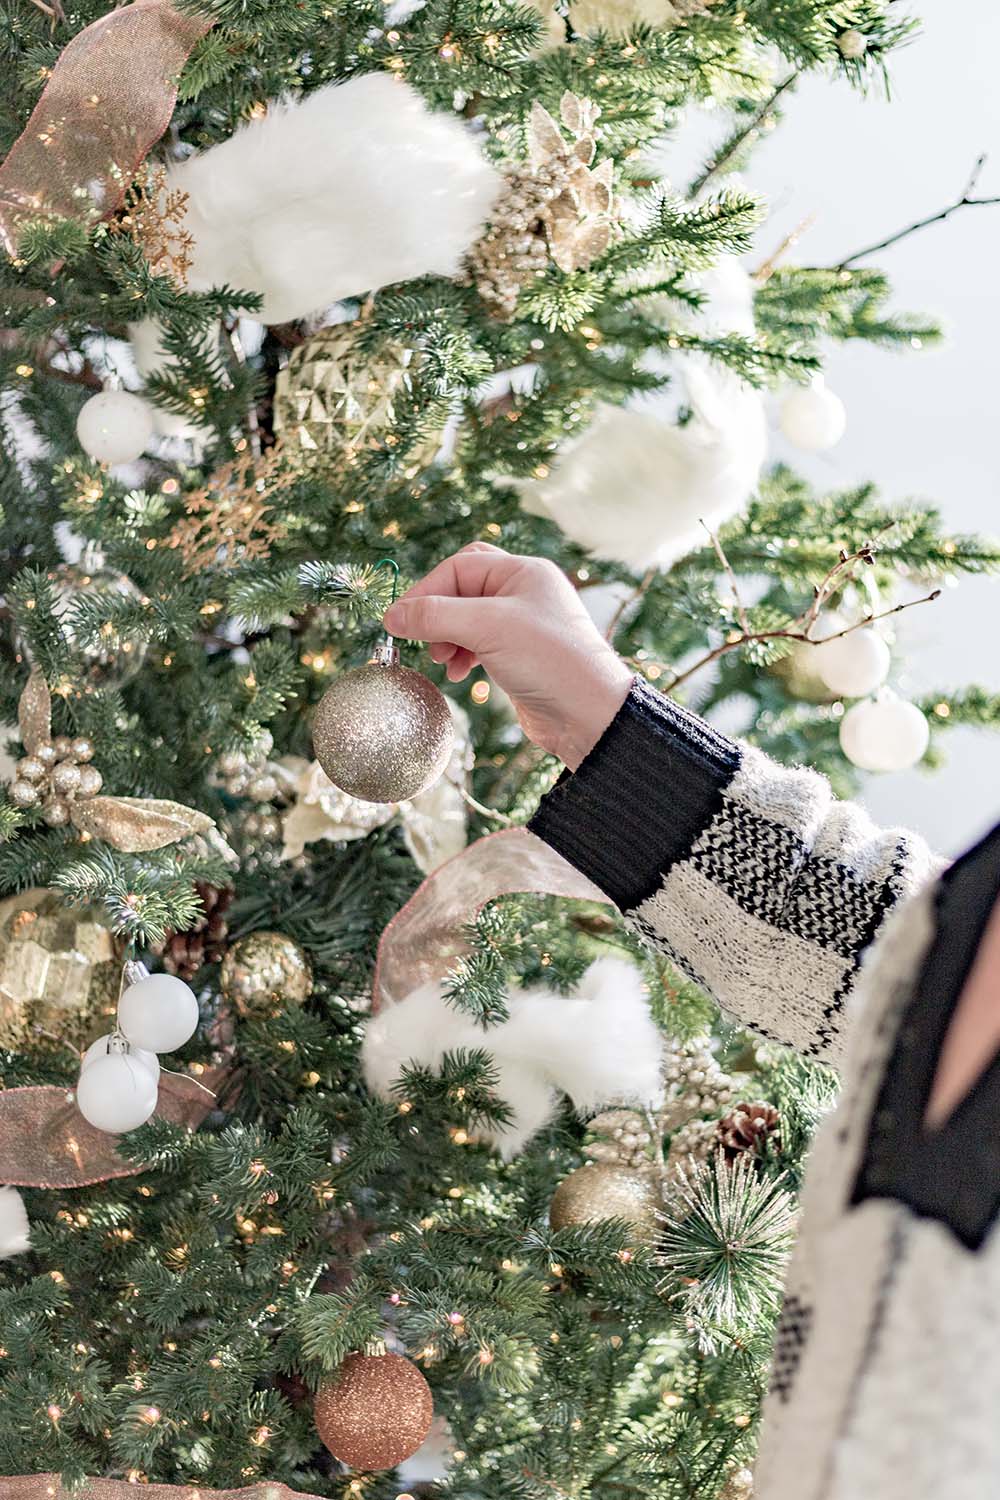 A woman adds a glitter ornament to a Christmas tree.